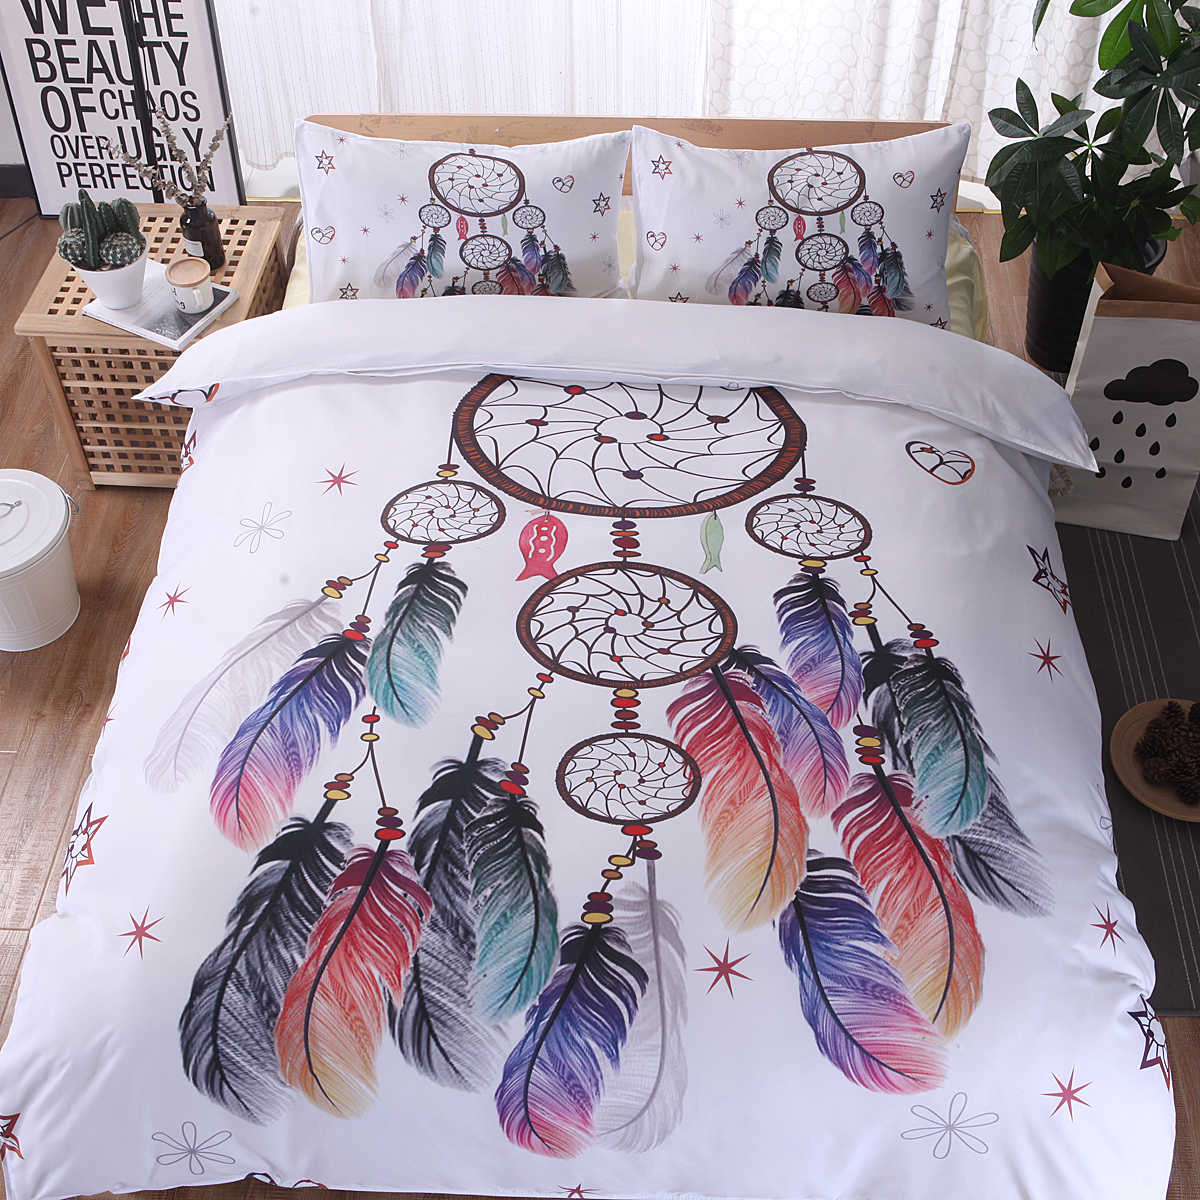 

3 PCS Bedding Sets Campanula Printing Quilt Cover Pillowcase For Queen Size